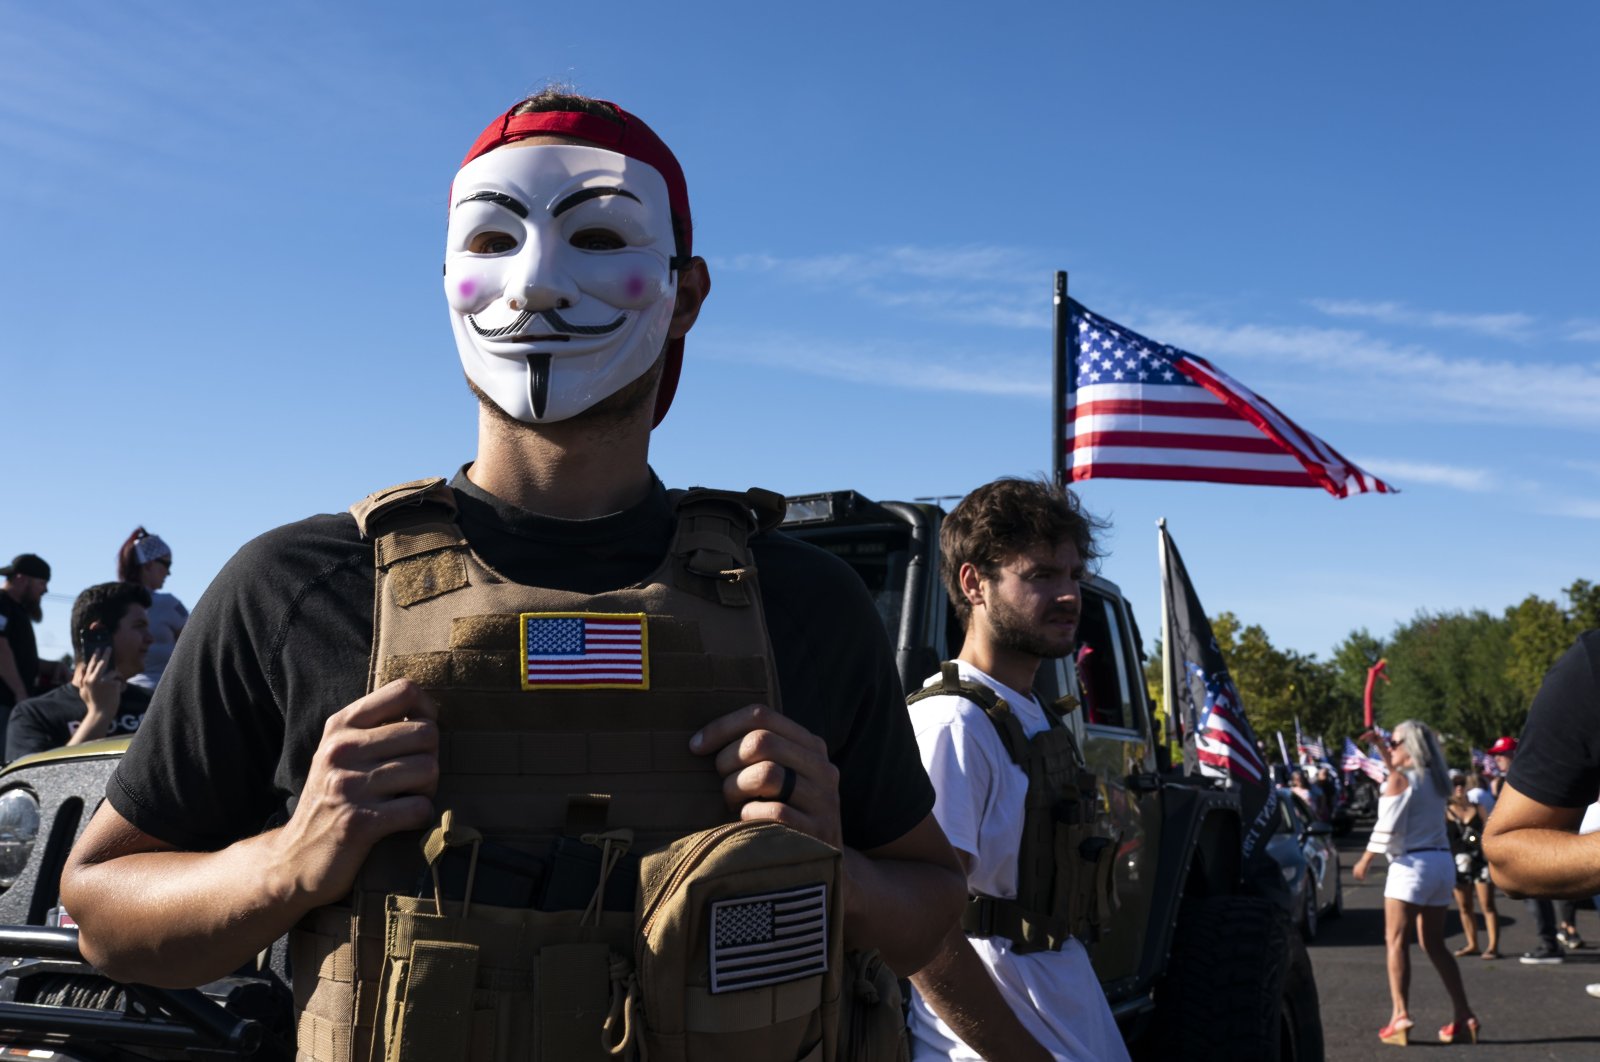 A man wears a Guy Fawkes mask during a rally in support of U.S. President Donald Trump, Clackamas, Oregon, Aug. 29, 2020. (AFP Photo)